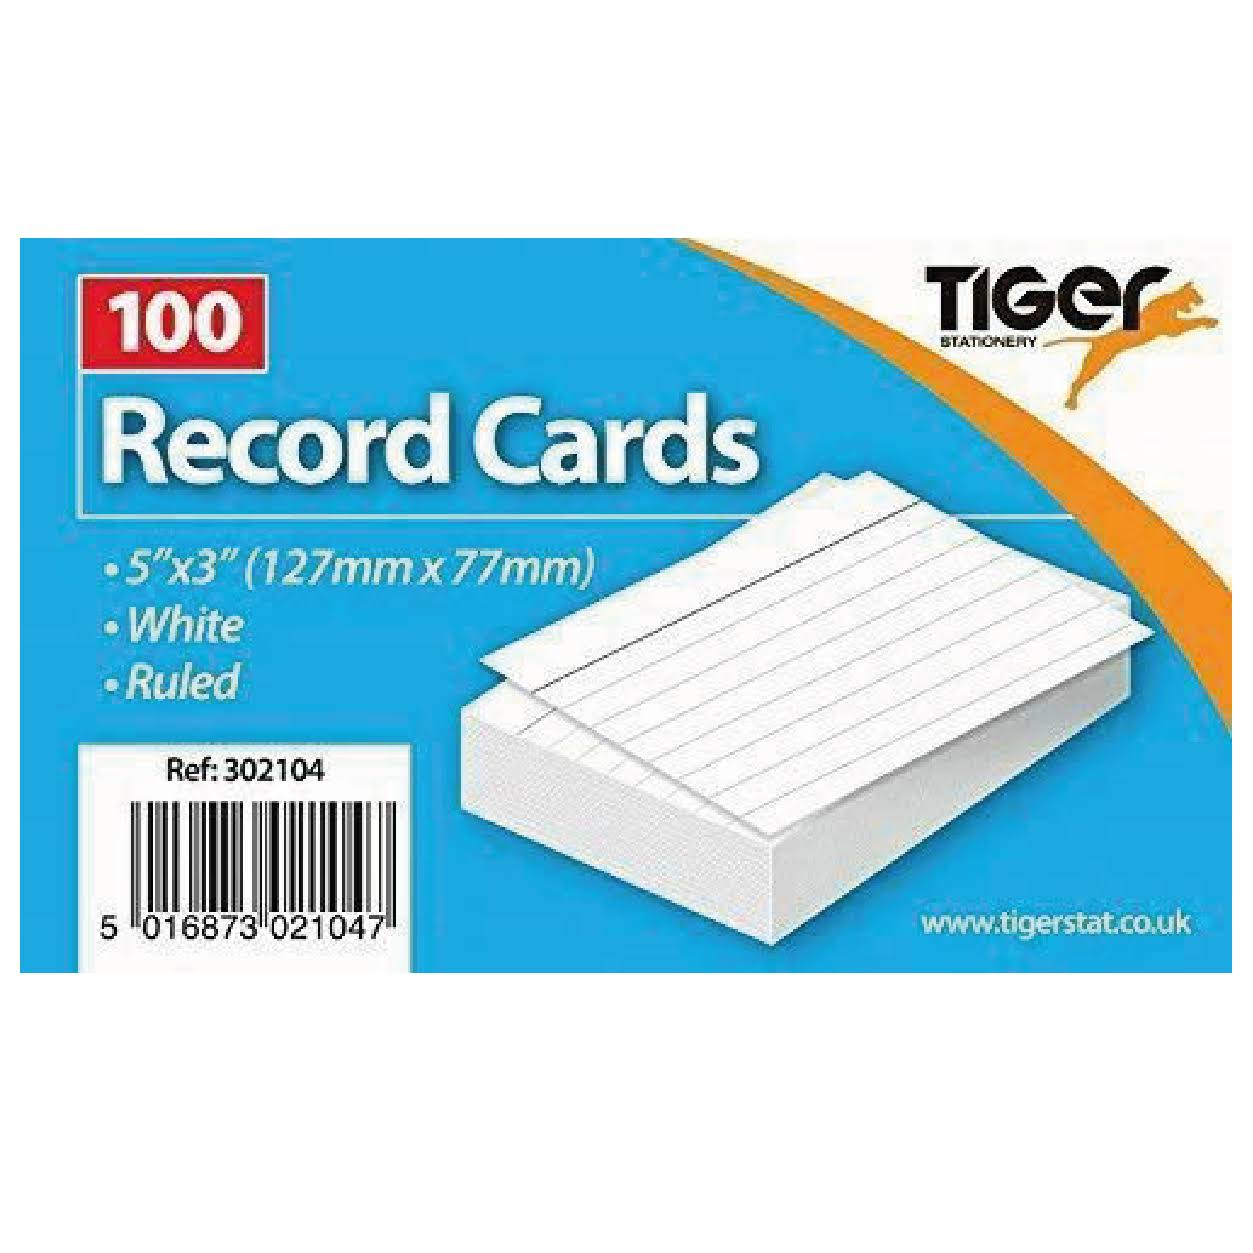 100 Record Cards - 5x3"